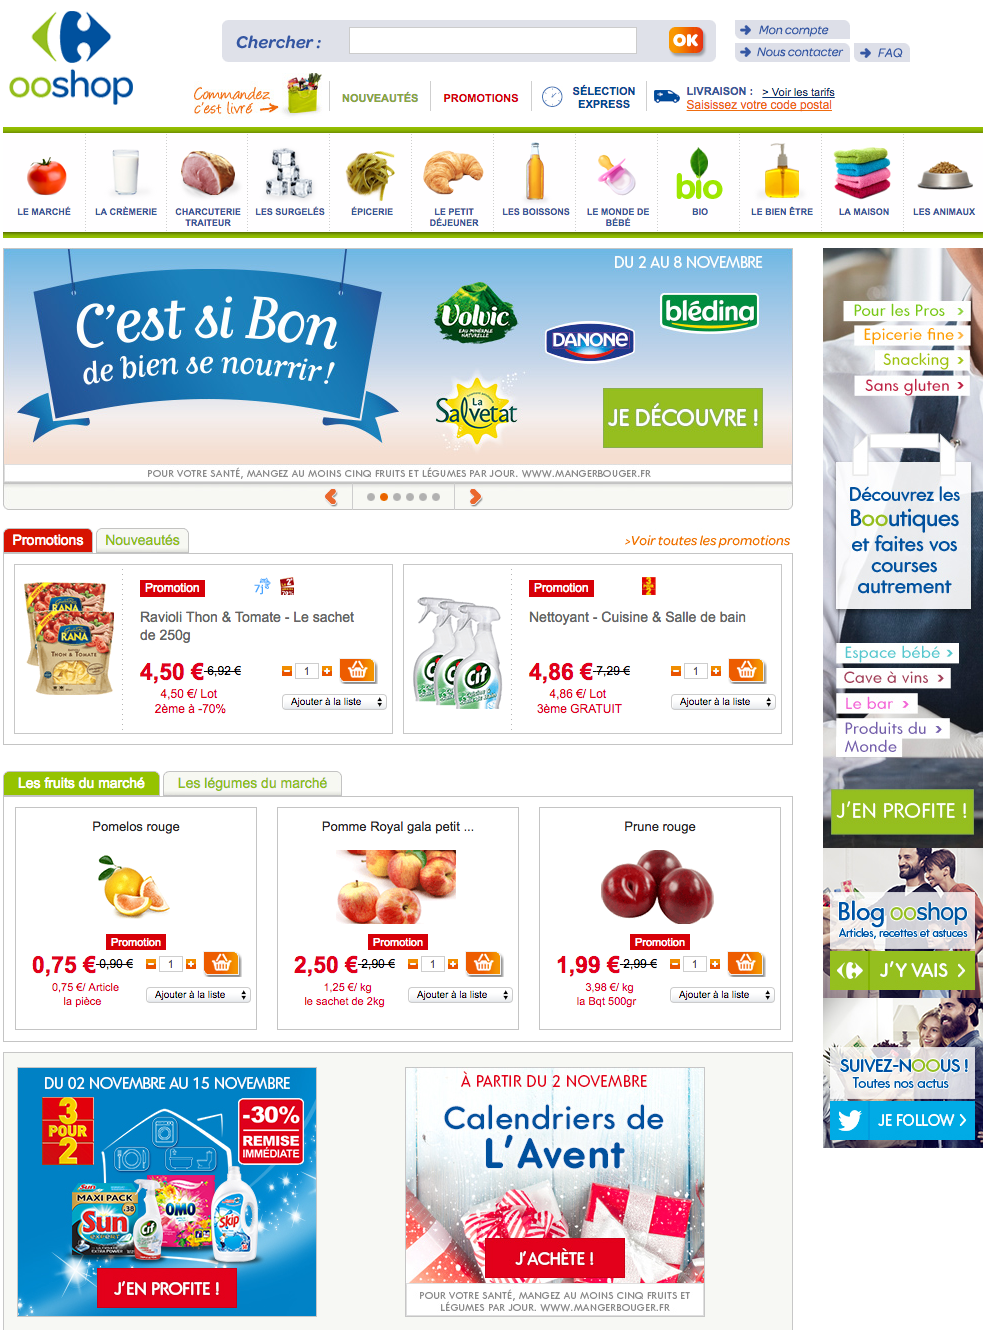 Carrefour - Ooshop